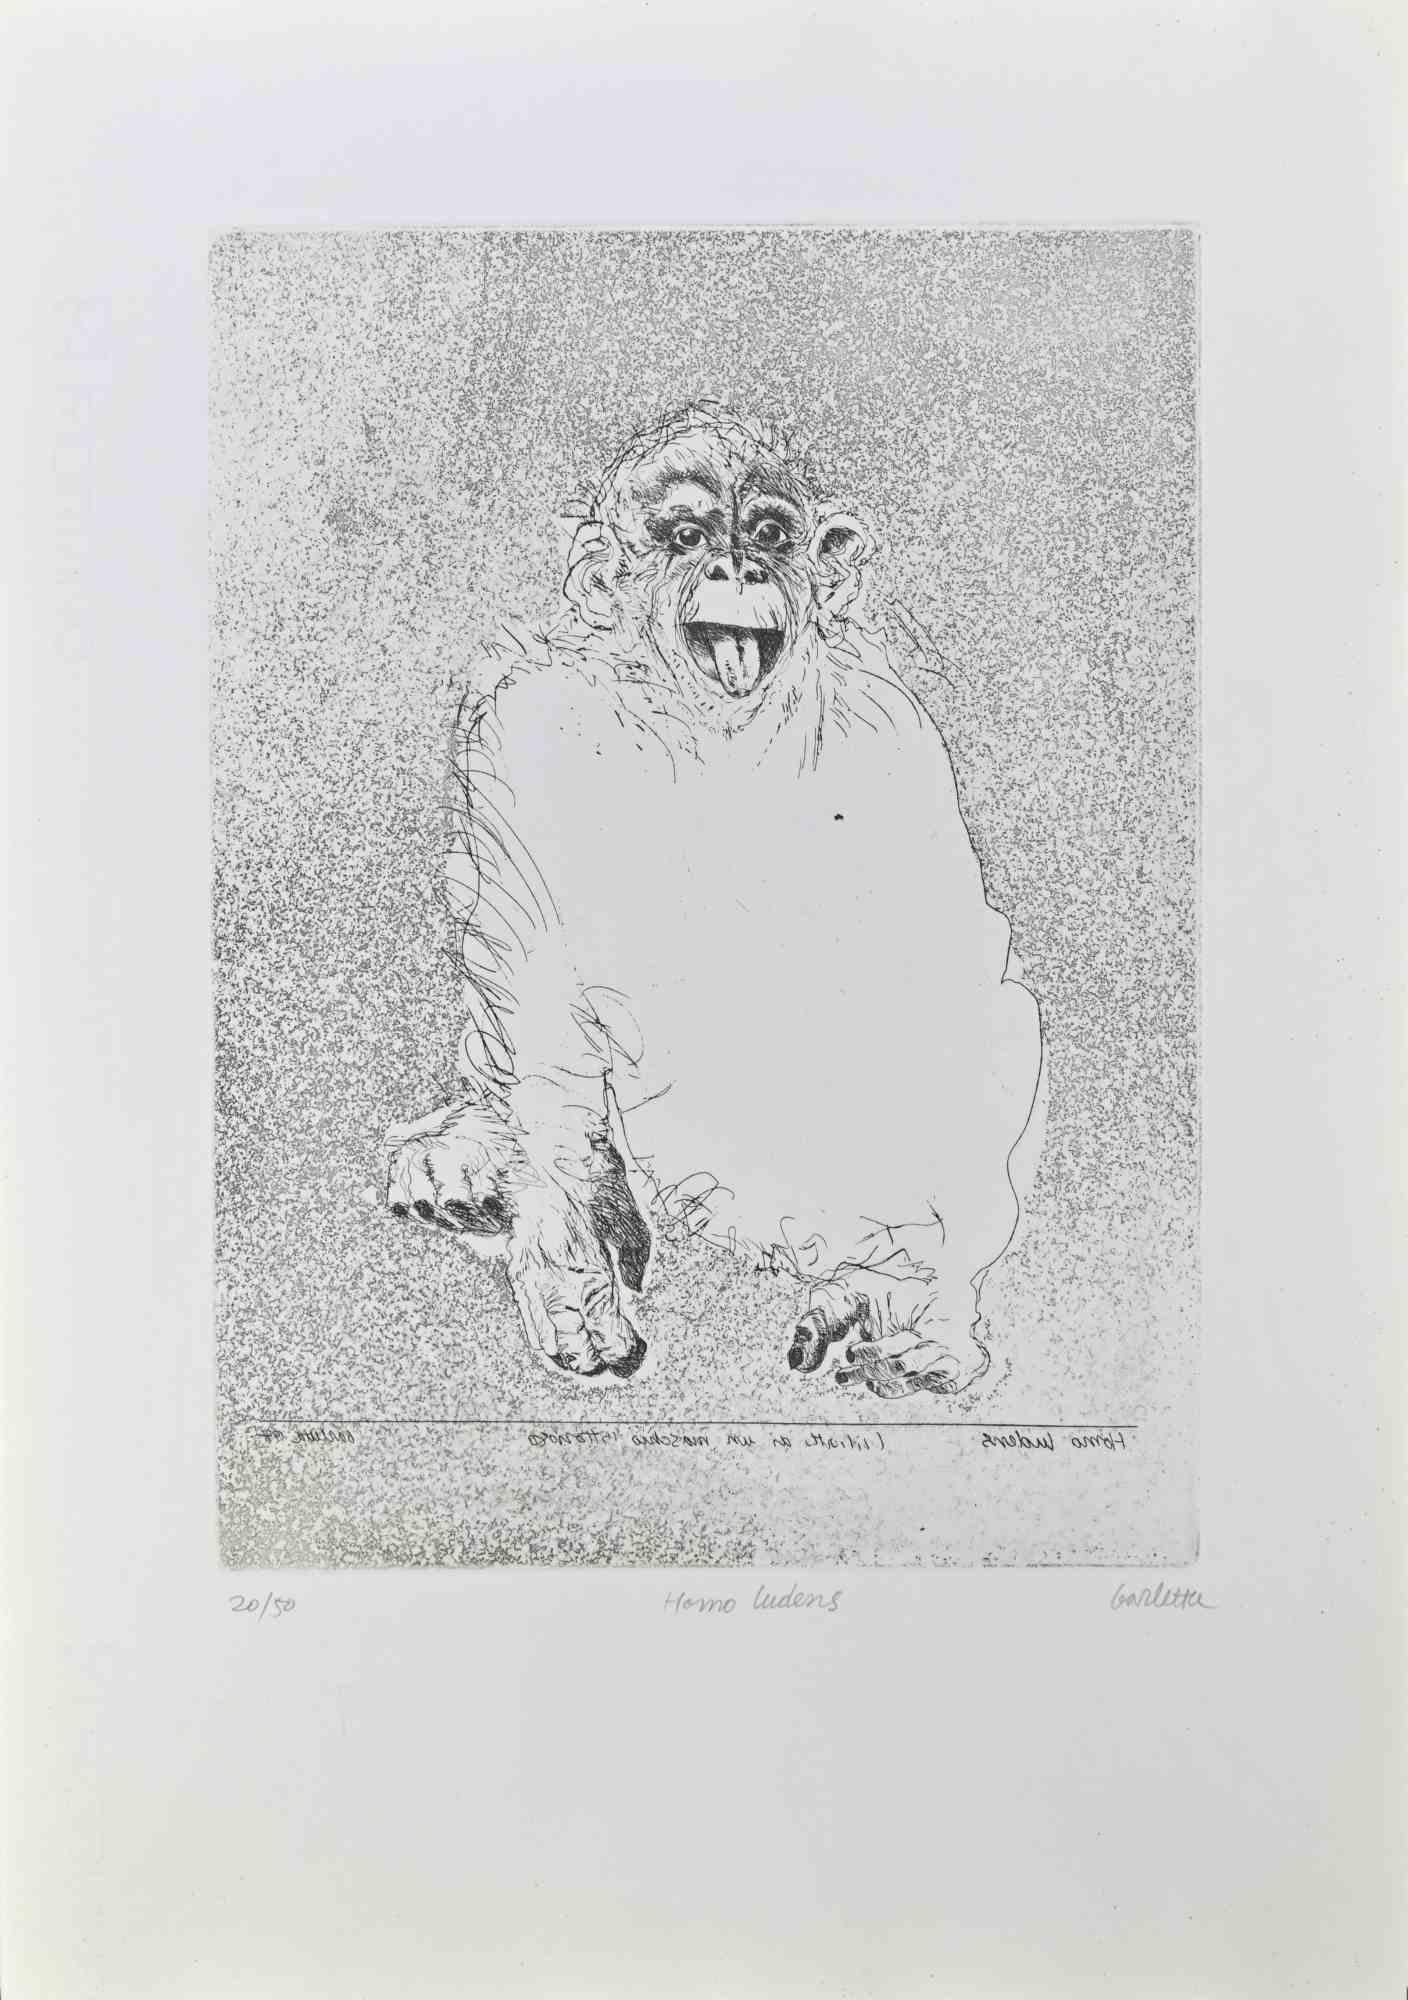 Homo Ludens  is an etching realized by Sergio Barletta in 1991.

Hand-signed  lower right in pencil, and titled lower center "Homo Ludens". Numbered lower left, from the edition of 50 prints.

Good conditions.

Sergio Barletta (1934) is an Italian